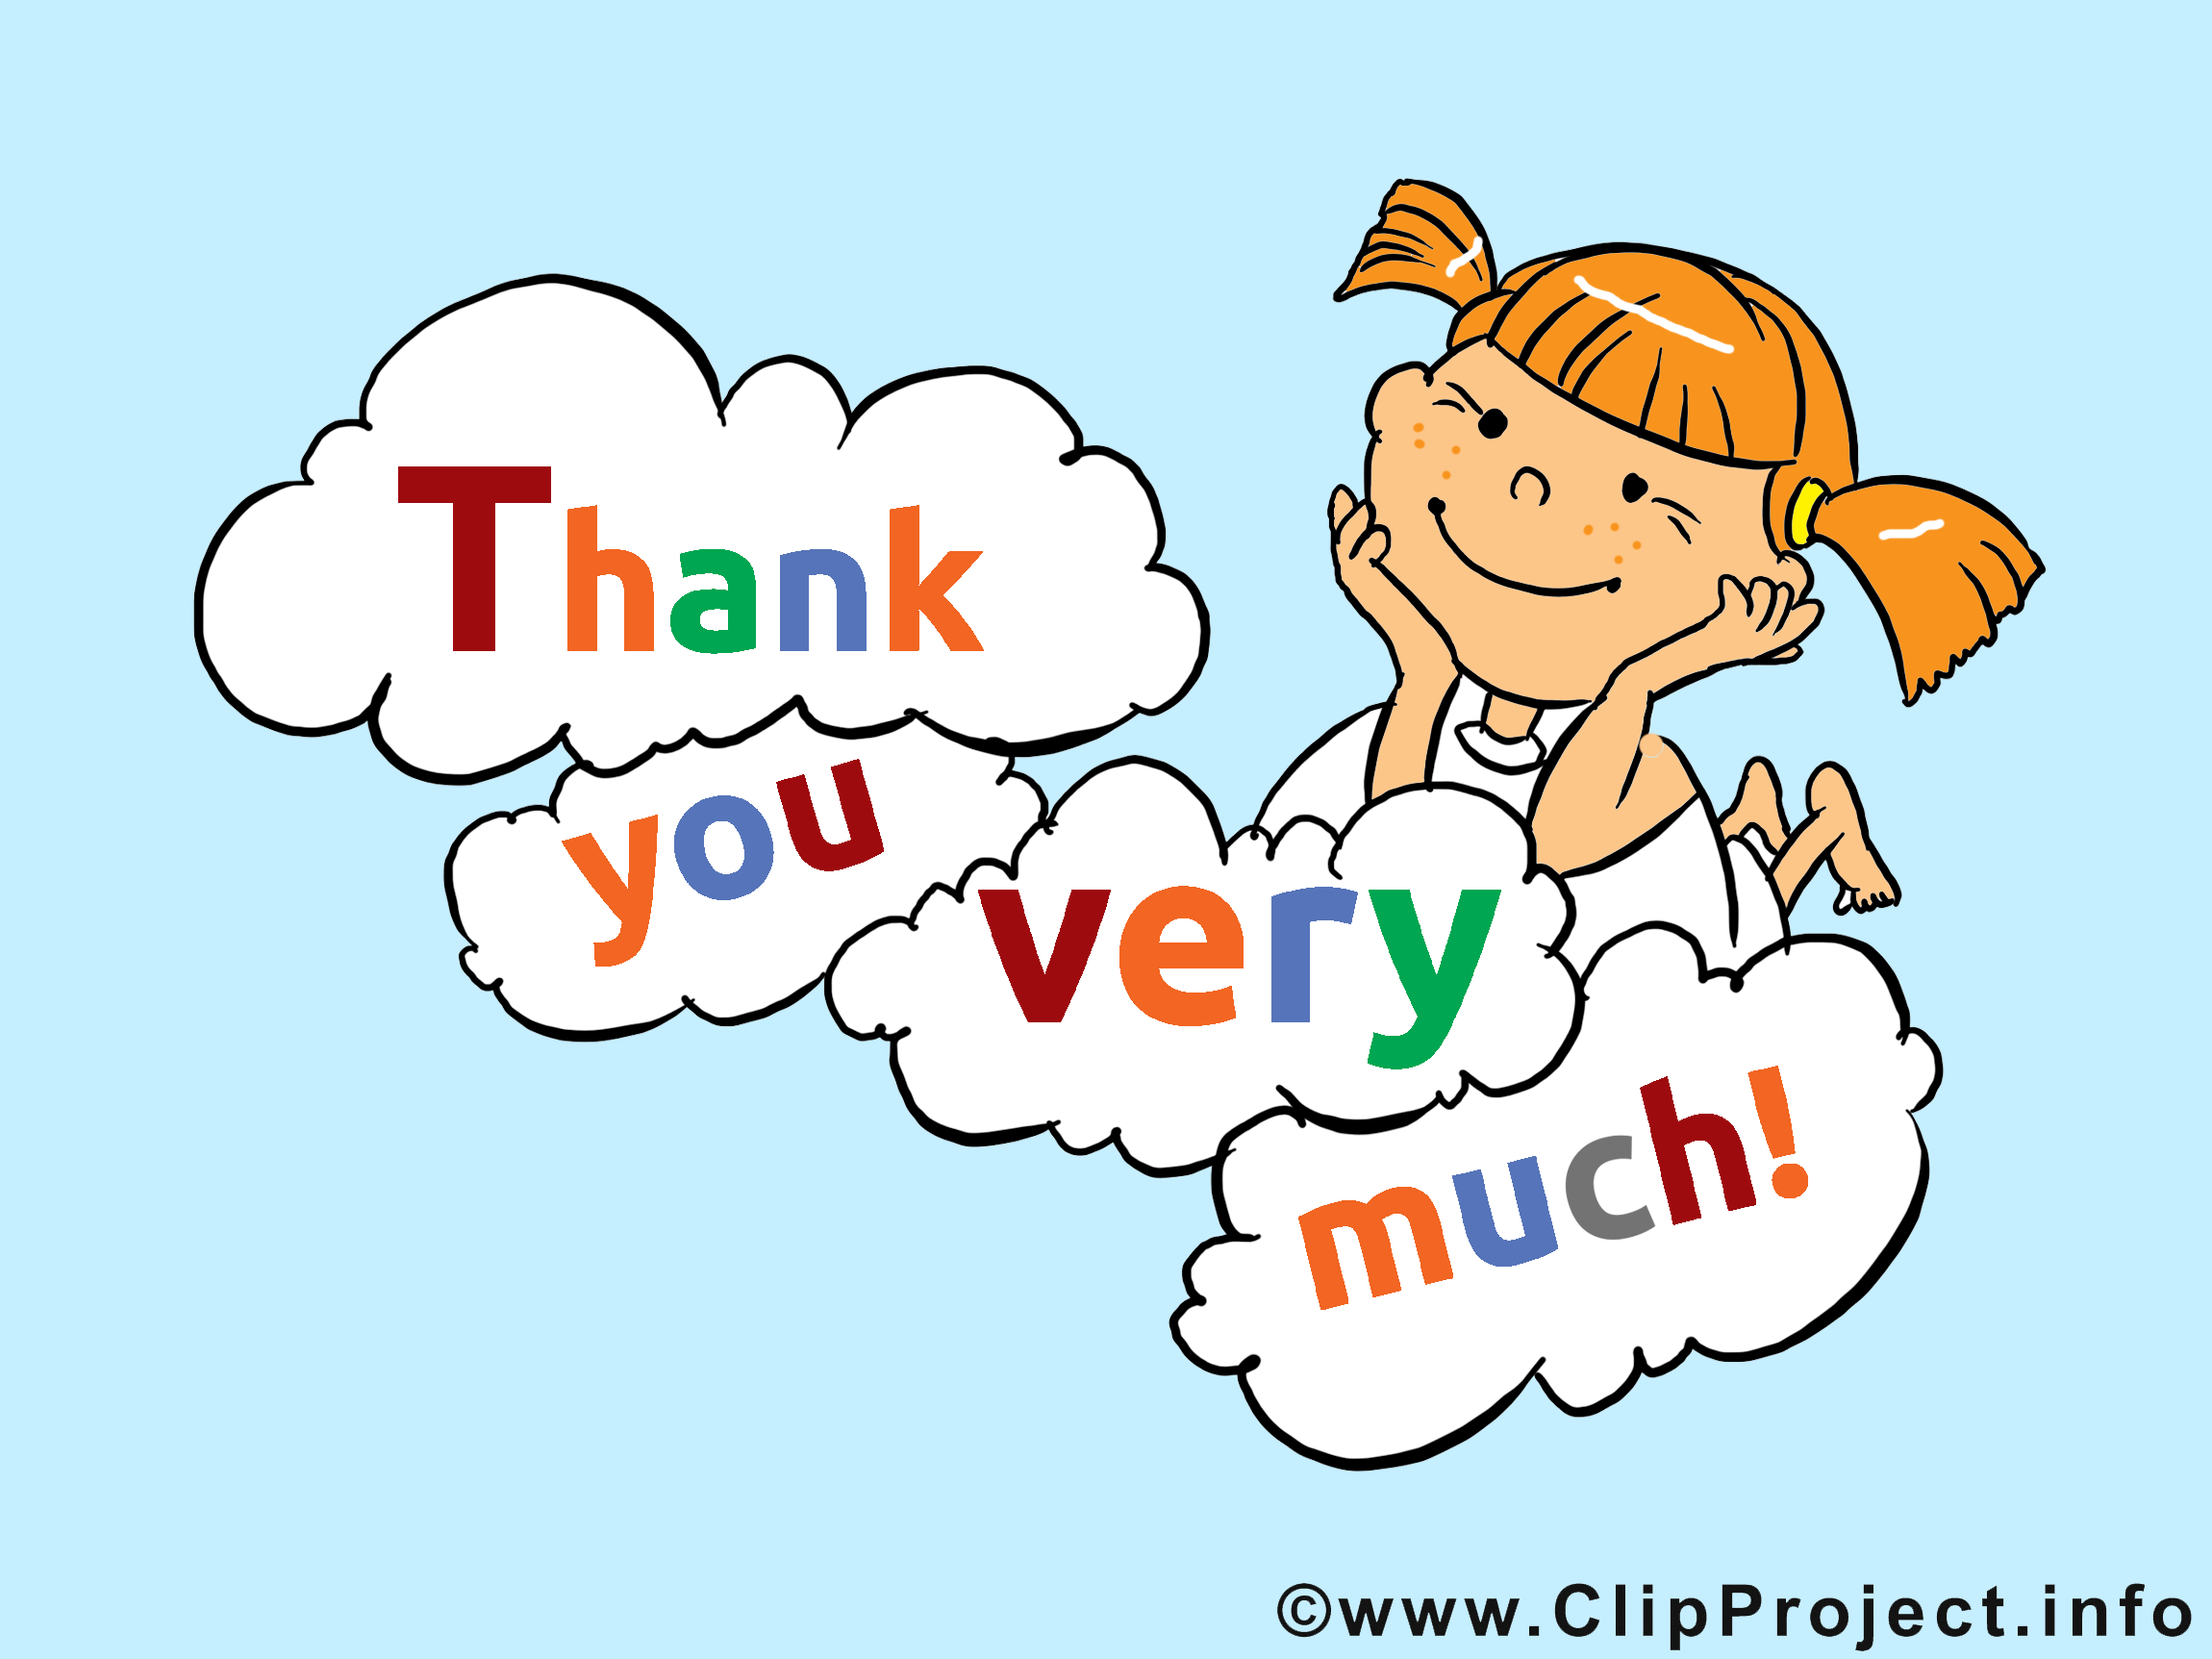 Funny thank you images free clipart free clip art images ...